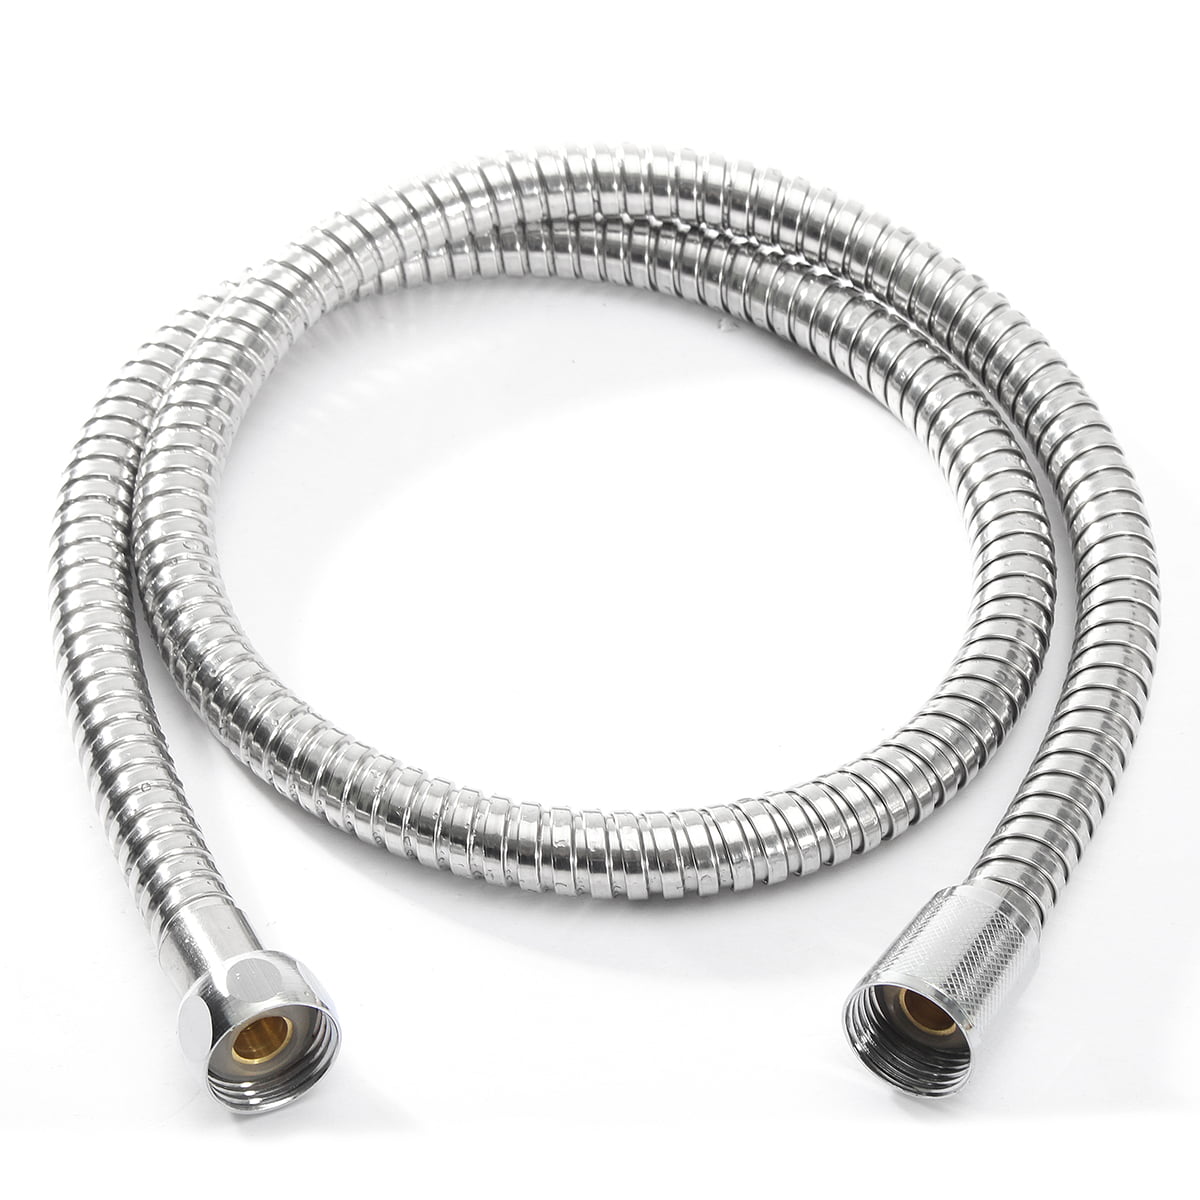 HOMEIDEAS 138-Inch Shower Hose Stainless Steel Extra Long Shower Head Hose Bathroom Handheld Showerhead Sprayer Extension Replacement,Polished Chrome